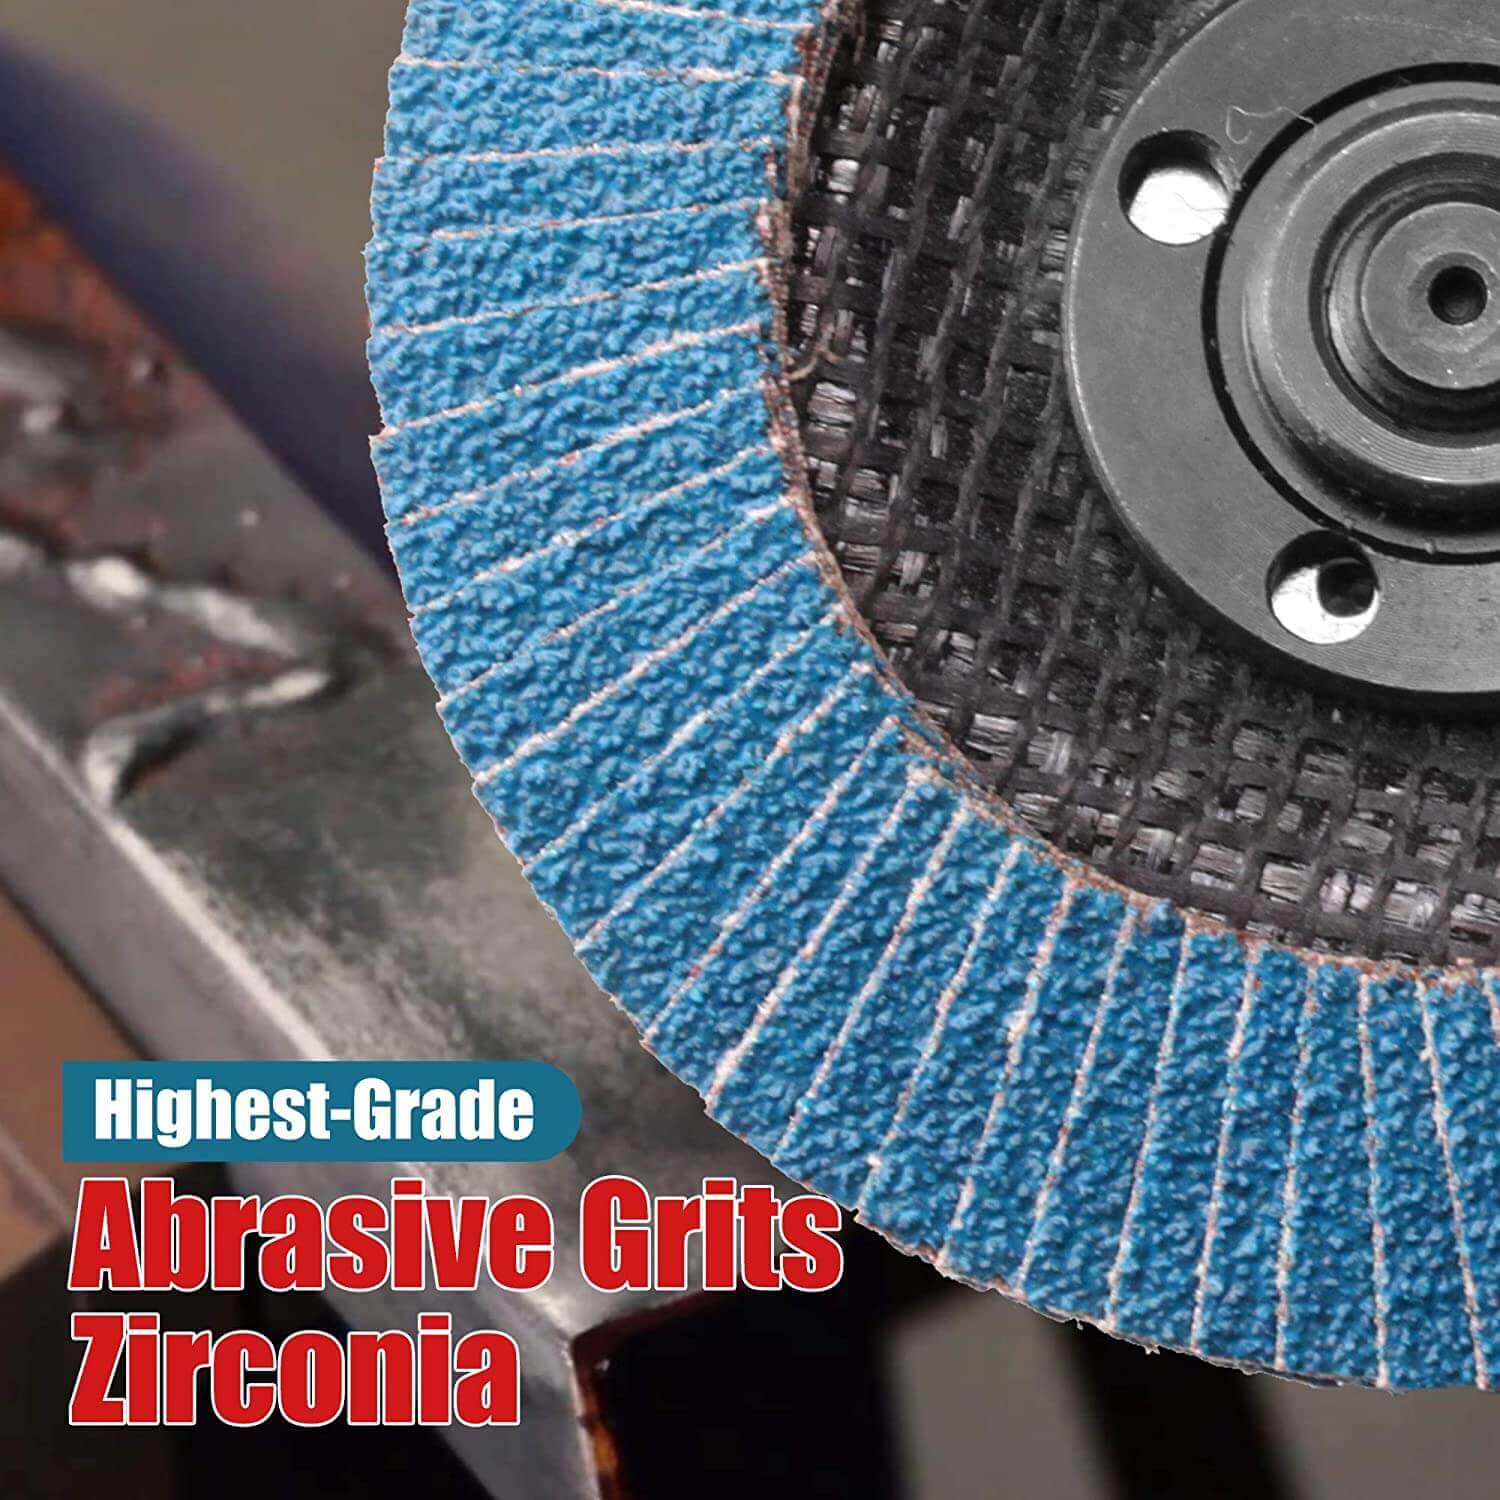 4-1/2 In. T29 Flap Discs For Stainless Steel, Sheet Metal,40/60/80/120 Grits